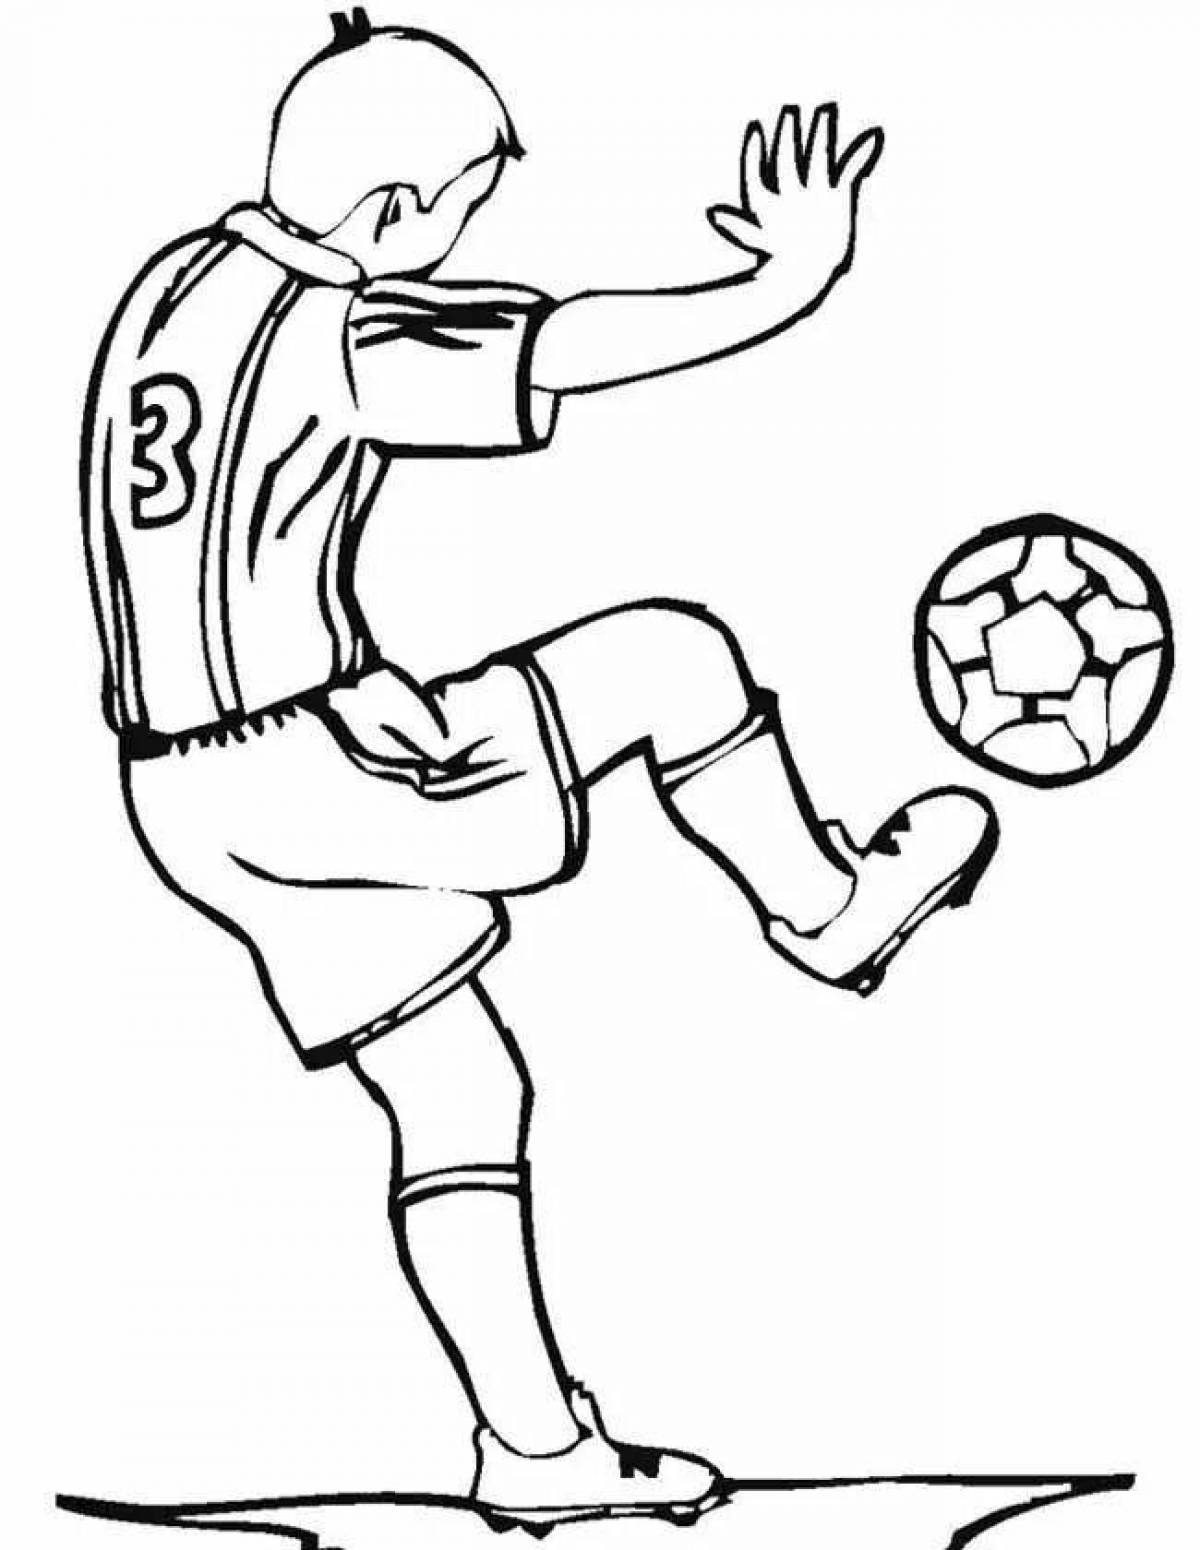 Playful soccer player with ball